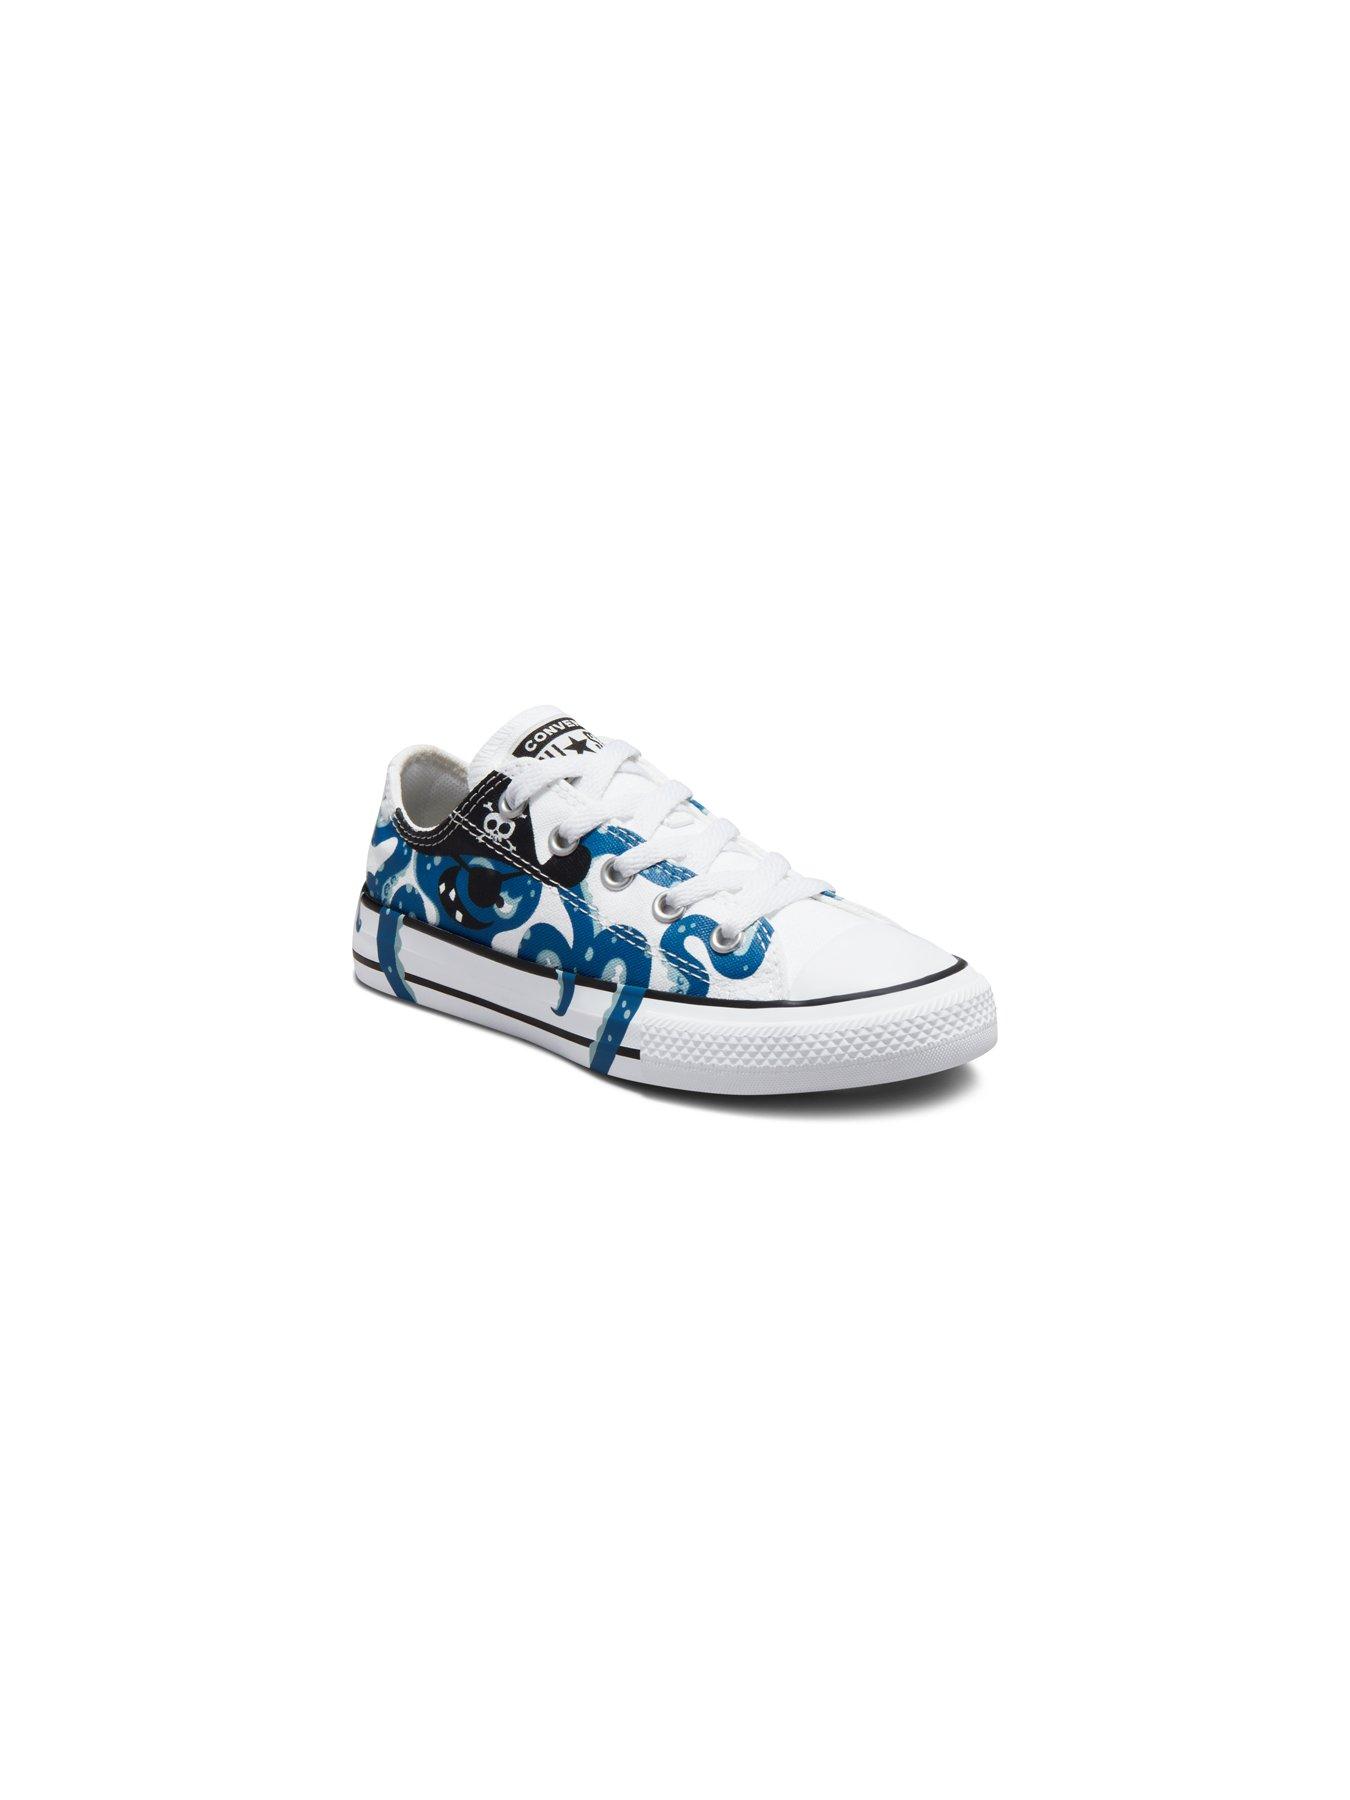 Trainers Chuck Taylor All Star Ox Childrens Boys Octopirate Print Trainers -White/Multi